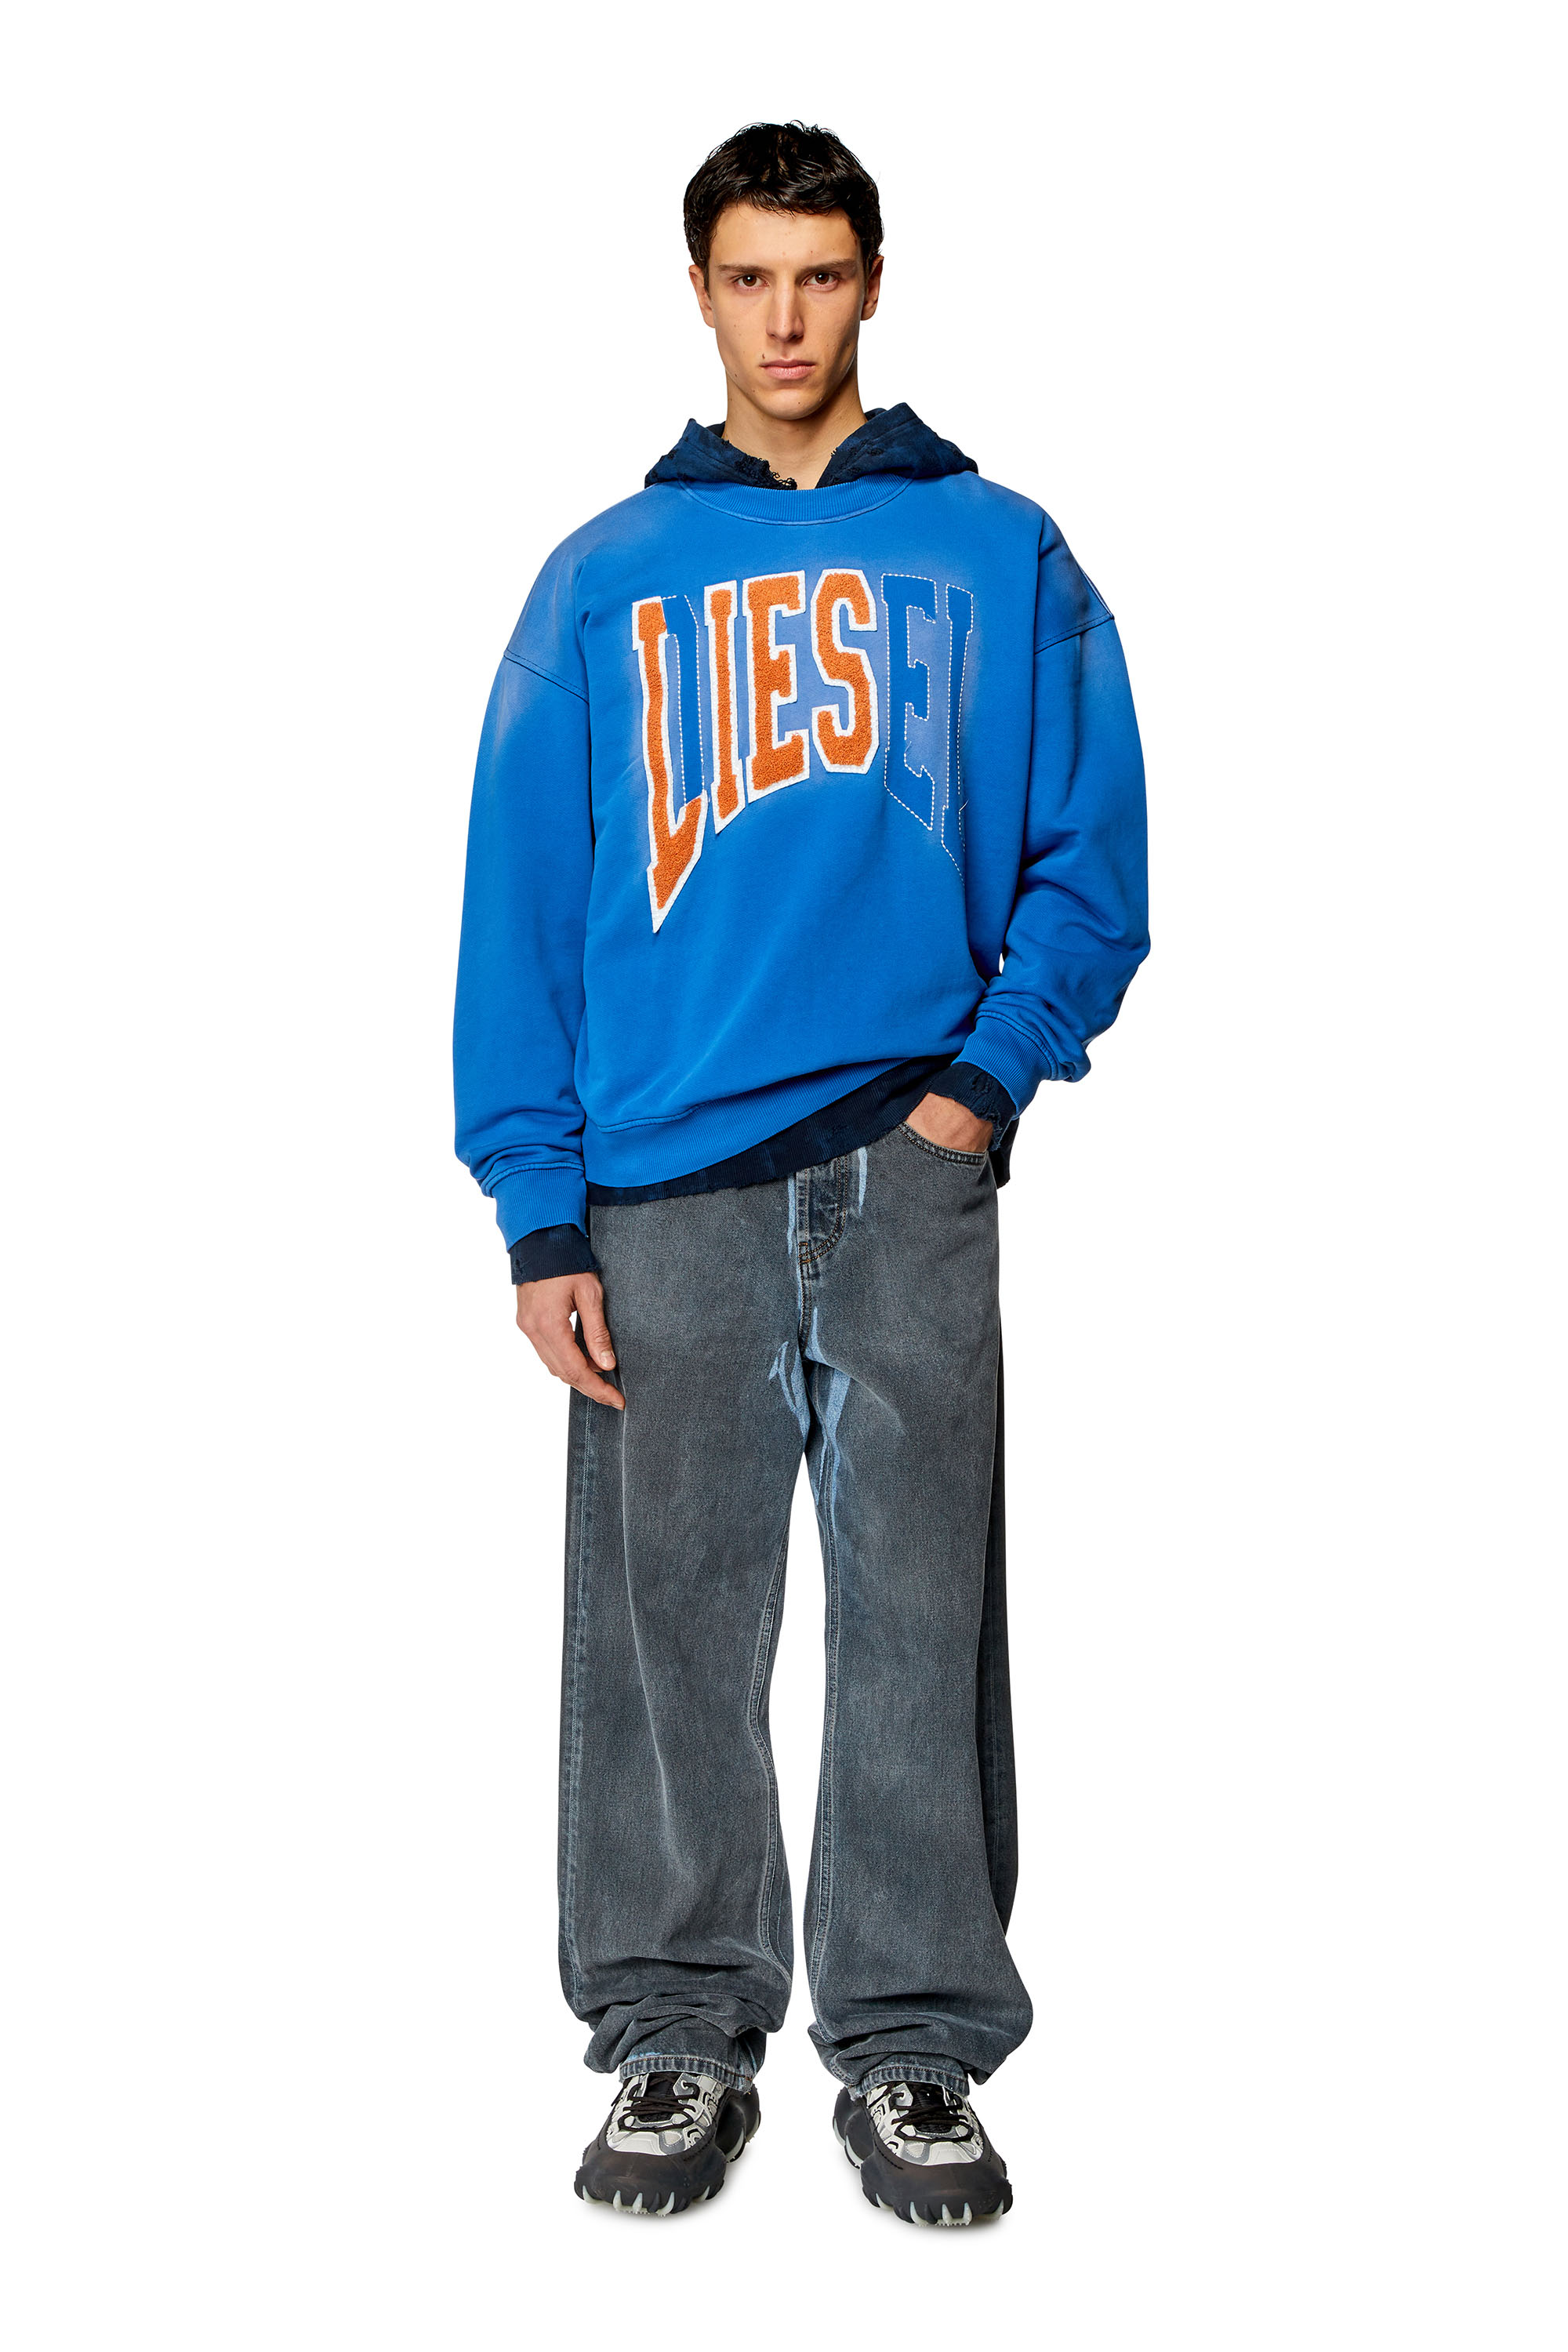 Diesel - S-BOXT-N6, Man College sweatshirt with LIES patches in Blue - Image 2